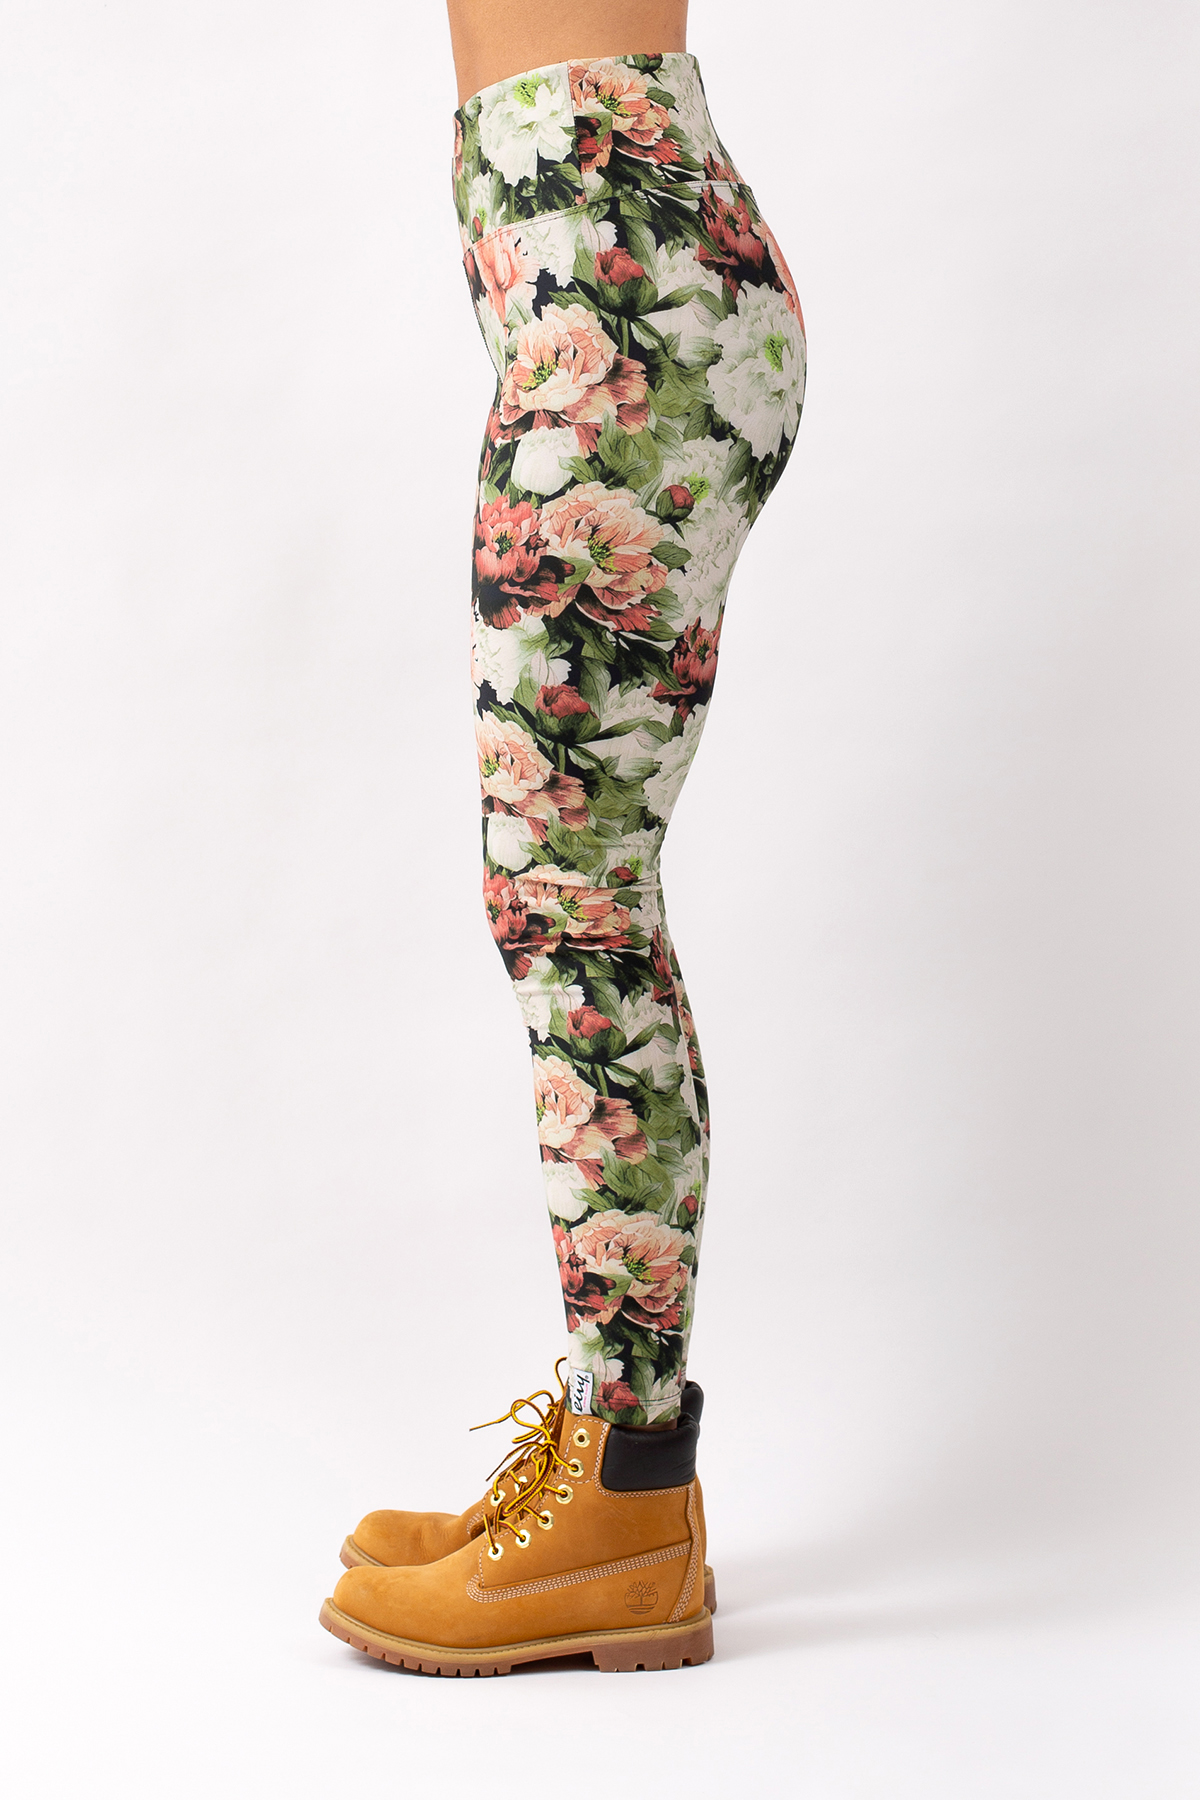 Base Layer | Icecold Tights - Autumn Bloom | XS